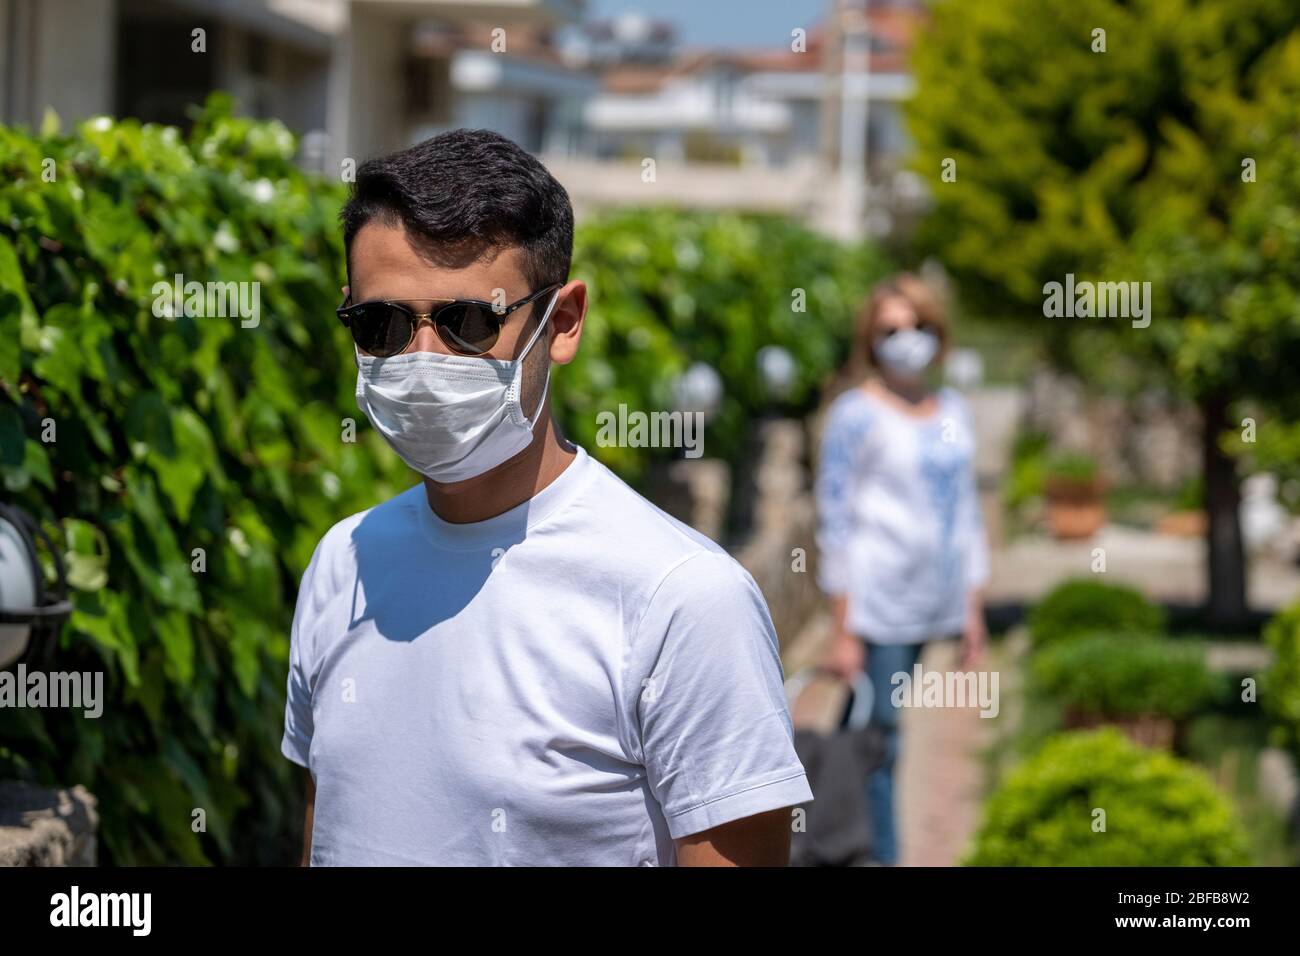 Man wearing a protective mask to protect himself from corona virus. Stock Photo